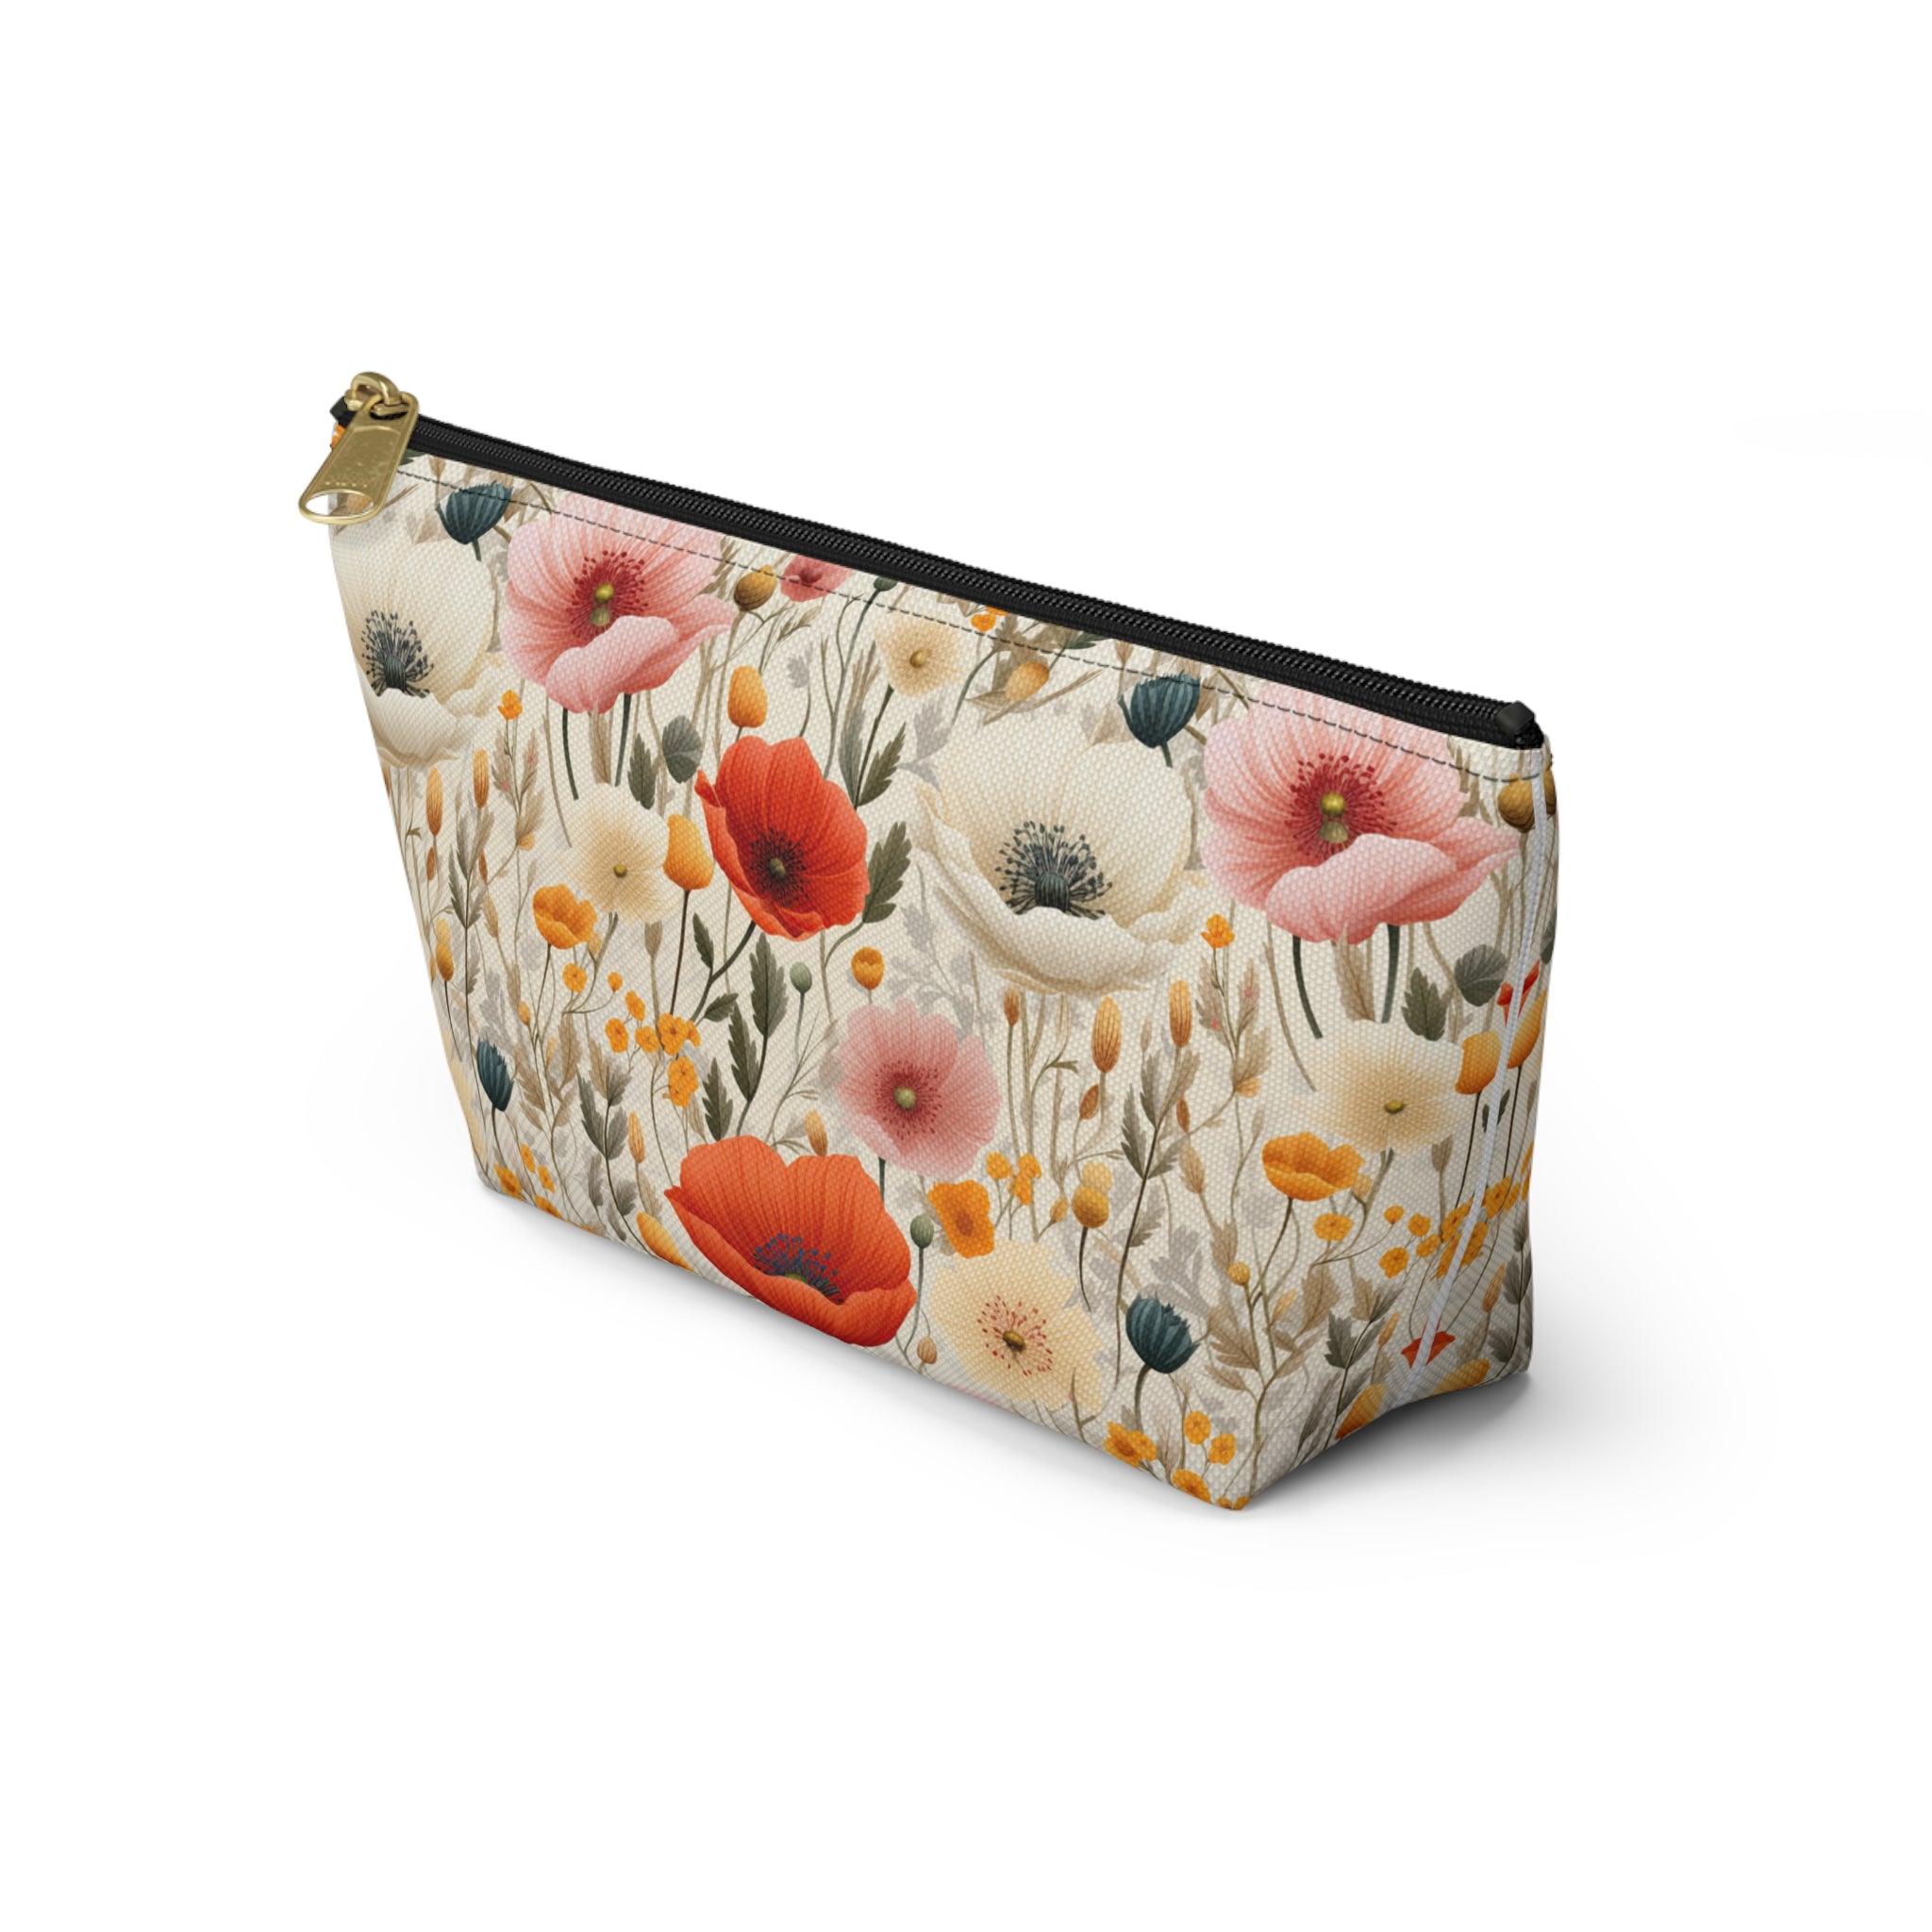 Poppy Love Pouch, Poppy Pouch, Floral Pouch, Cute Pouch, Floral